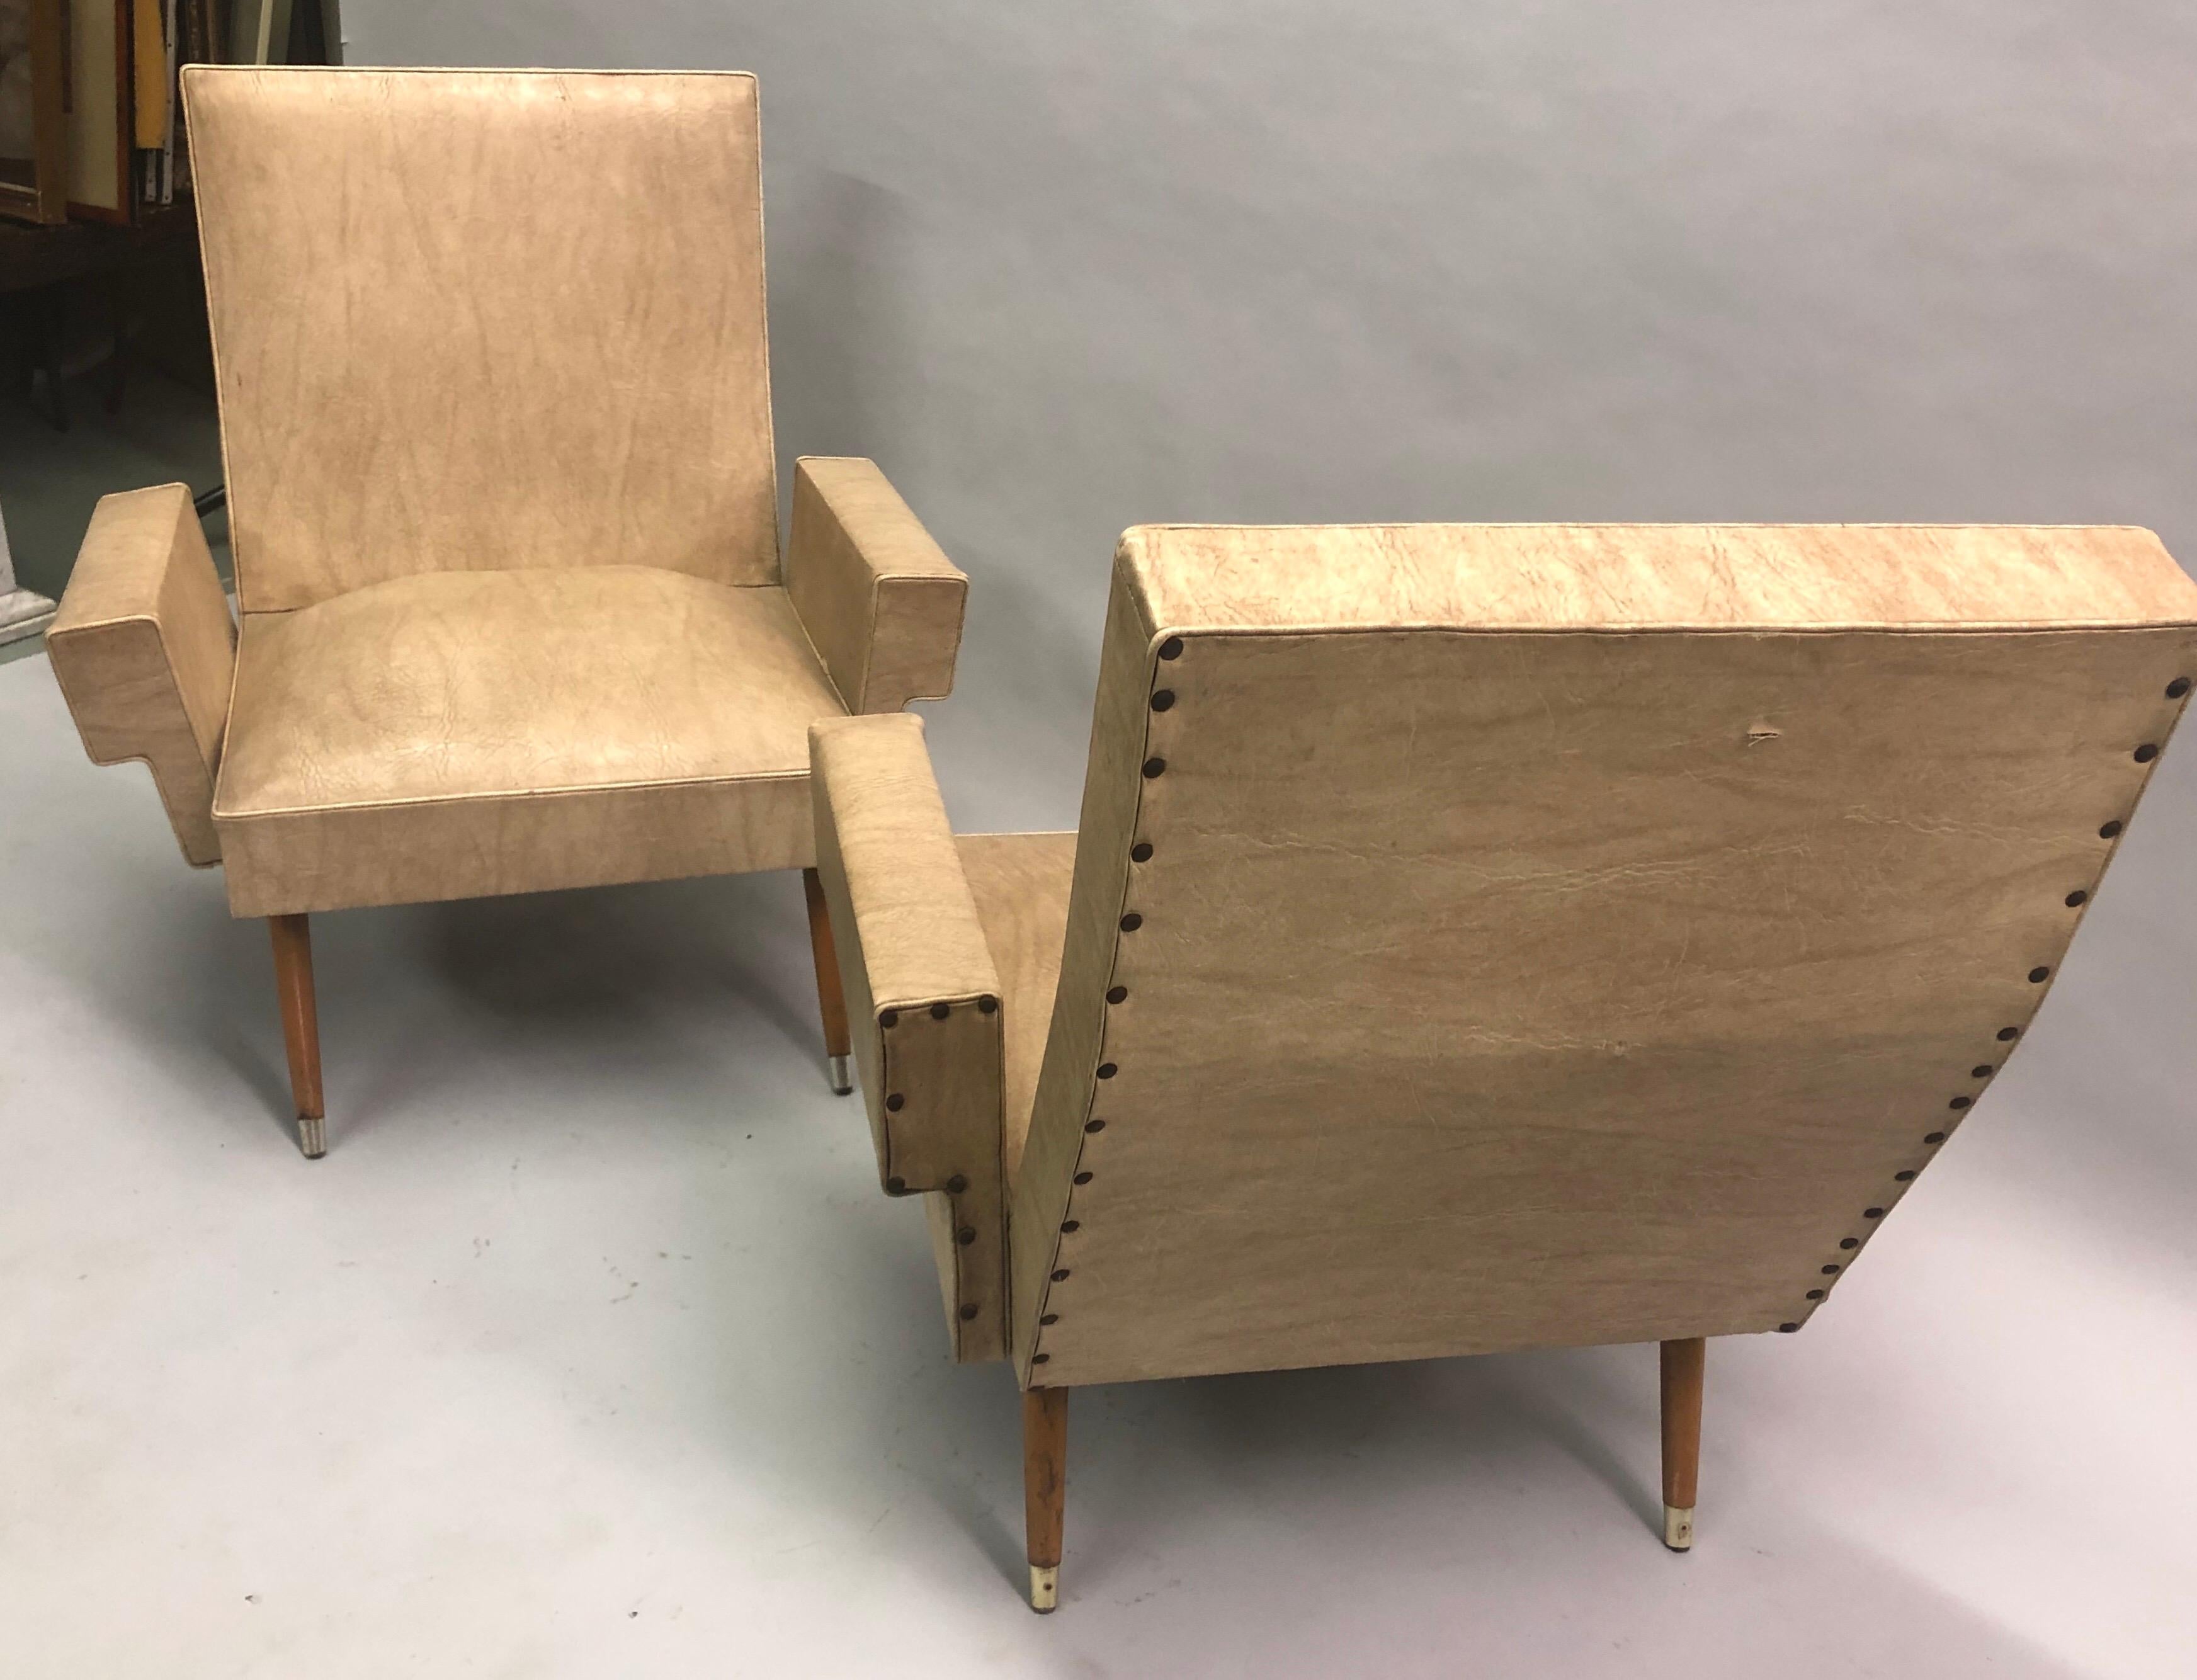 Pair of Rare Italian Futurist Lounge Chairs with a stunning and unique form conveying speed and movement and 